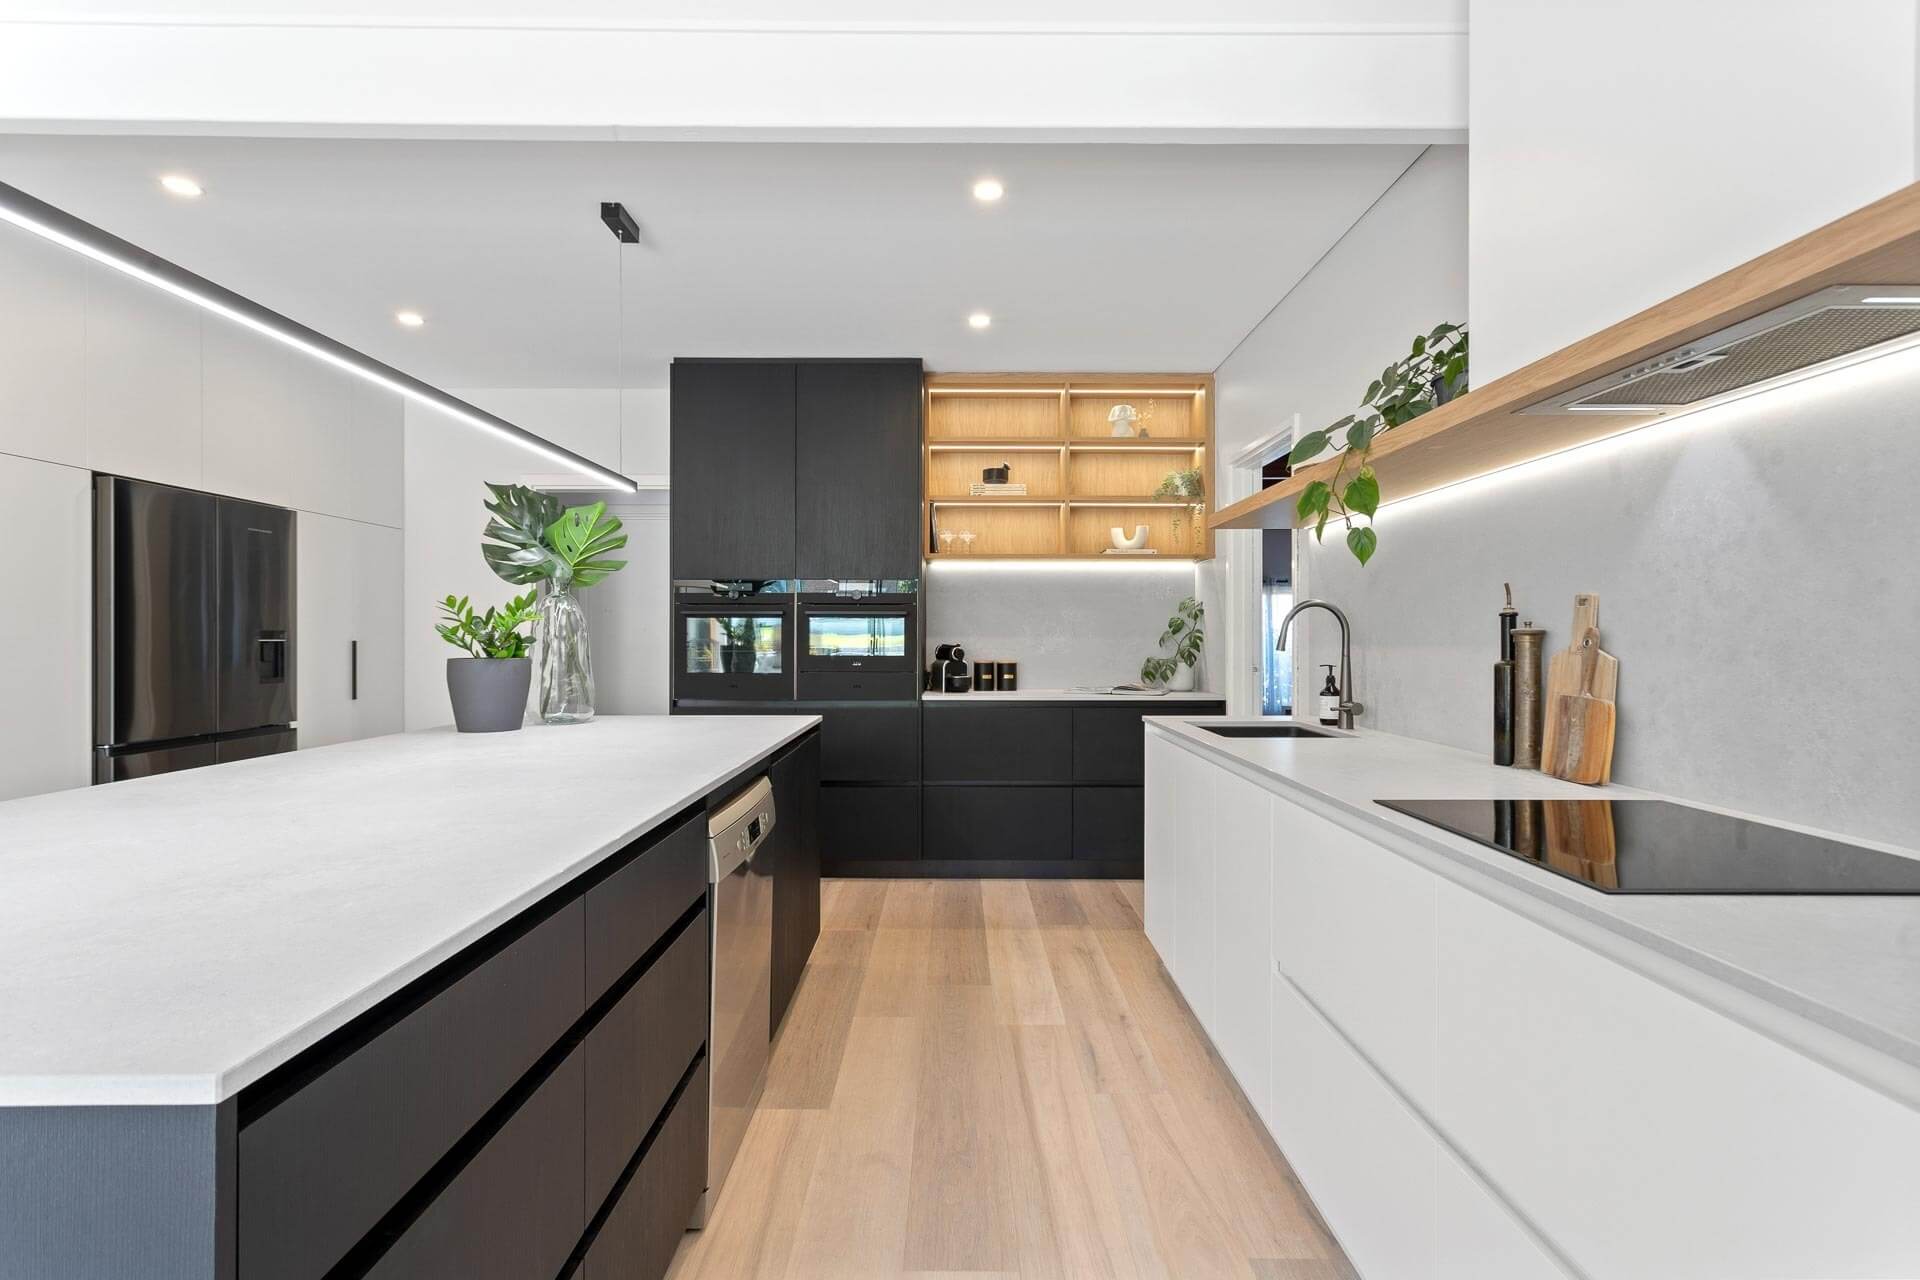 Using colour in your kitchen design